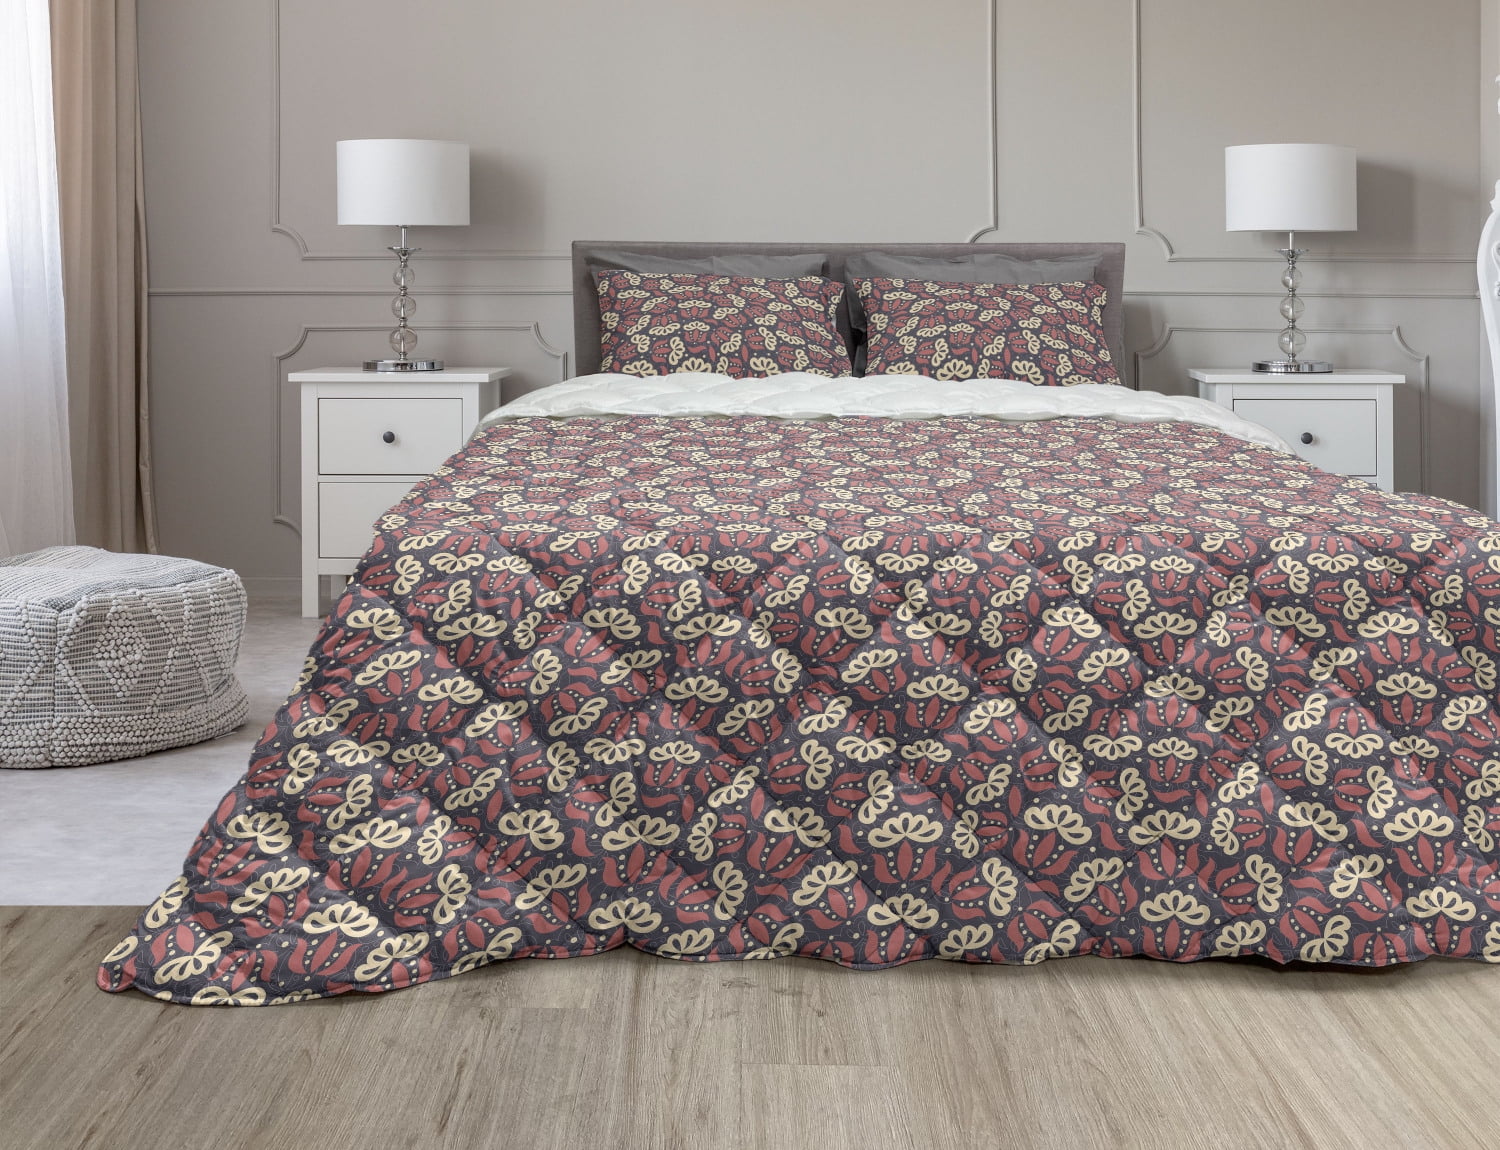 Details about   2-Piece Paisley Twin Comforter & Sham Bedding Set Maroon,Green,Tan Preowned 